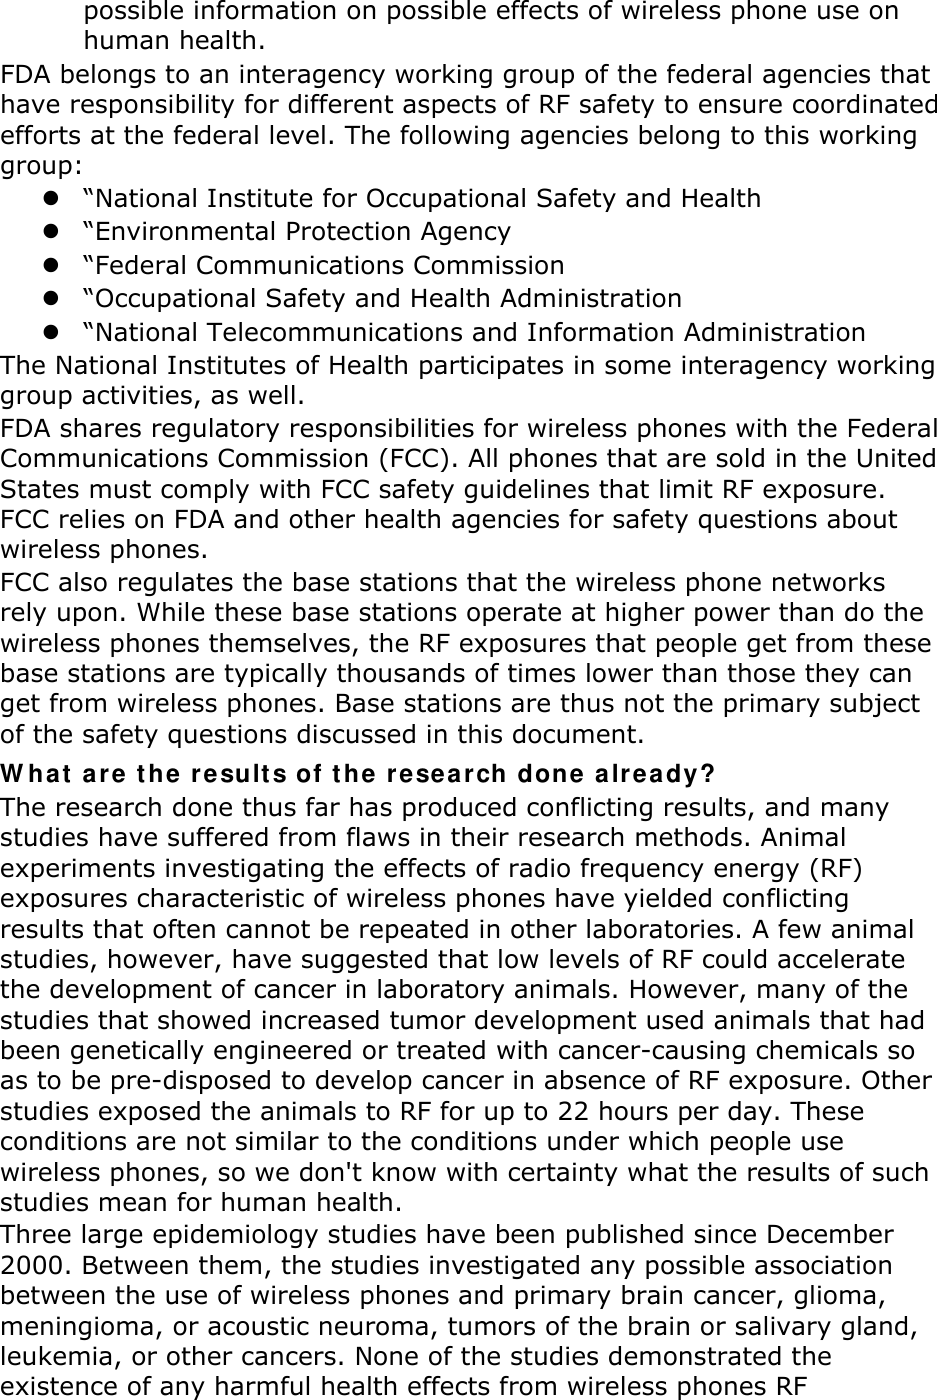 possible information on possible effects of wireless phone use on human health. FDA belongs to an interagency working group of the federal agencies that have responsibility for different aspects of RF safety to ensure coordinated efforts at the federal level. The following agencies belong to this working group:  “National Institute for Occupational Safety and Health  “Environmental Protection Agency  “Federal Communications Commission  “Occupational Safety and Health Administration  “National Telecommunications and Information Administration The National Institutes of Health participates in some interagency working group activities, as well. FDA shares regulatory responsibilities for wireless phones with the Federal Communications Commission (FCC). All phones that are sold in the United States must comply with FCC safety guidelines that limit RF exposure. FCC relies on FDA and other health agencies for safety questions about wireless phones. FCC also regulates the base stations that the wireless phone networks rely upon. While these base stations operate at higher power than do the wireless phones themselves, the RF exposures that people get from these base stations are typically thousands of times lower than those they can get from wireless phones. Base stations are thus not the primary subject of the safety questions discussed in this document. W hat a re t he result s of t he rese ar ch done a lr eady? The research done thus far has produced conflicting results, and many studies have suffered from flaws in their research methods. Animal experiments investigating the effects of radio frequency energy (RF) exposures characteristic of wireless phones have yielded conflicting results that often cannot be repeated in other laboratories. A few animal studies, however, have suggested that low levels of RF could accelerate the development of cancer in laboratory animals. However, many of the studies that showed increased tumor development used animals that had been genetically engineered or treated with cancer-causing chemicals so as to be pre-disposed to develop cancer in absence of RF exposure. Other studies exposed the animals to RF for up to 22 hours per day. These conditions are not similar to the conditions under which people use wireless phones, so we don&apos;t know with certainty what the results of such studies mean for human health. Three large epidemiology studies have been published since December 2000. Between them, the studies investigated any possible association between the use of wireless phones and primary brain cancer, glioma, meningioma, or acoustic neuroma, tumors of the brain or salivary gland, leukemia, or other cancers. None of the studies demonstrated the existence of any harmful health effects from wireless phones RF 